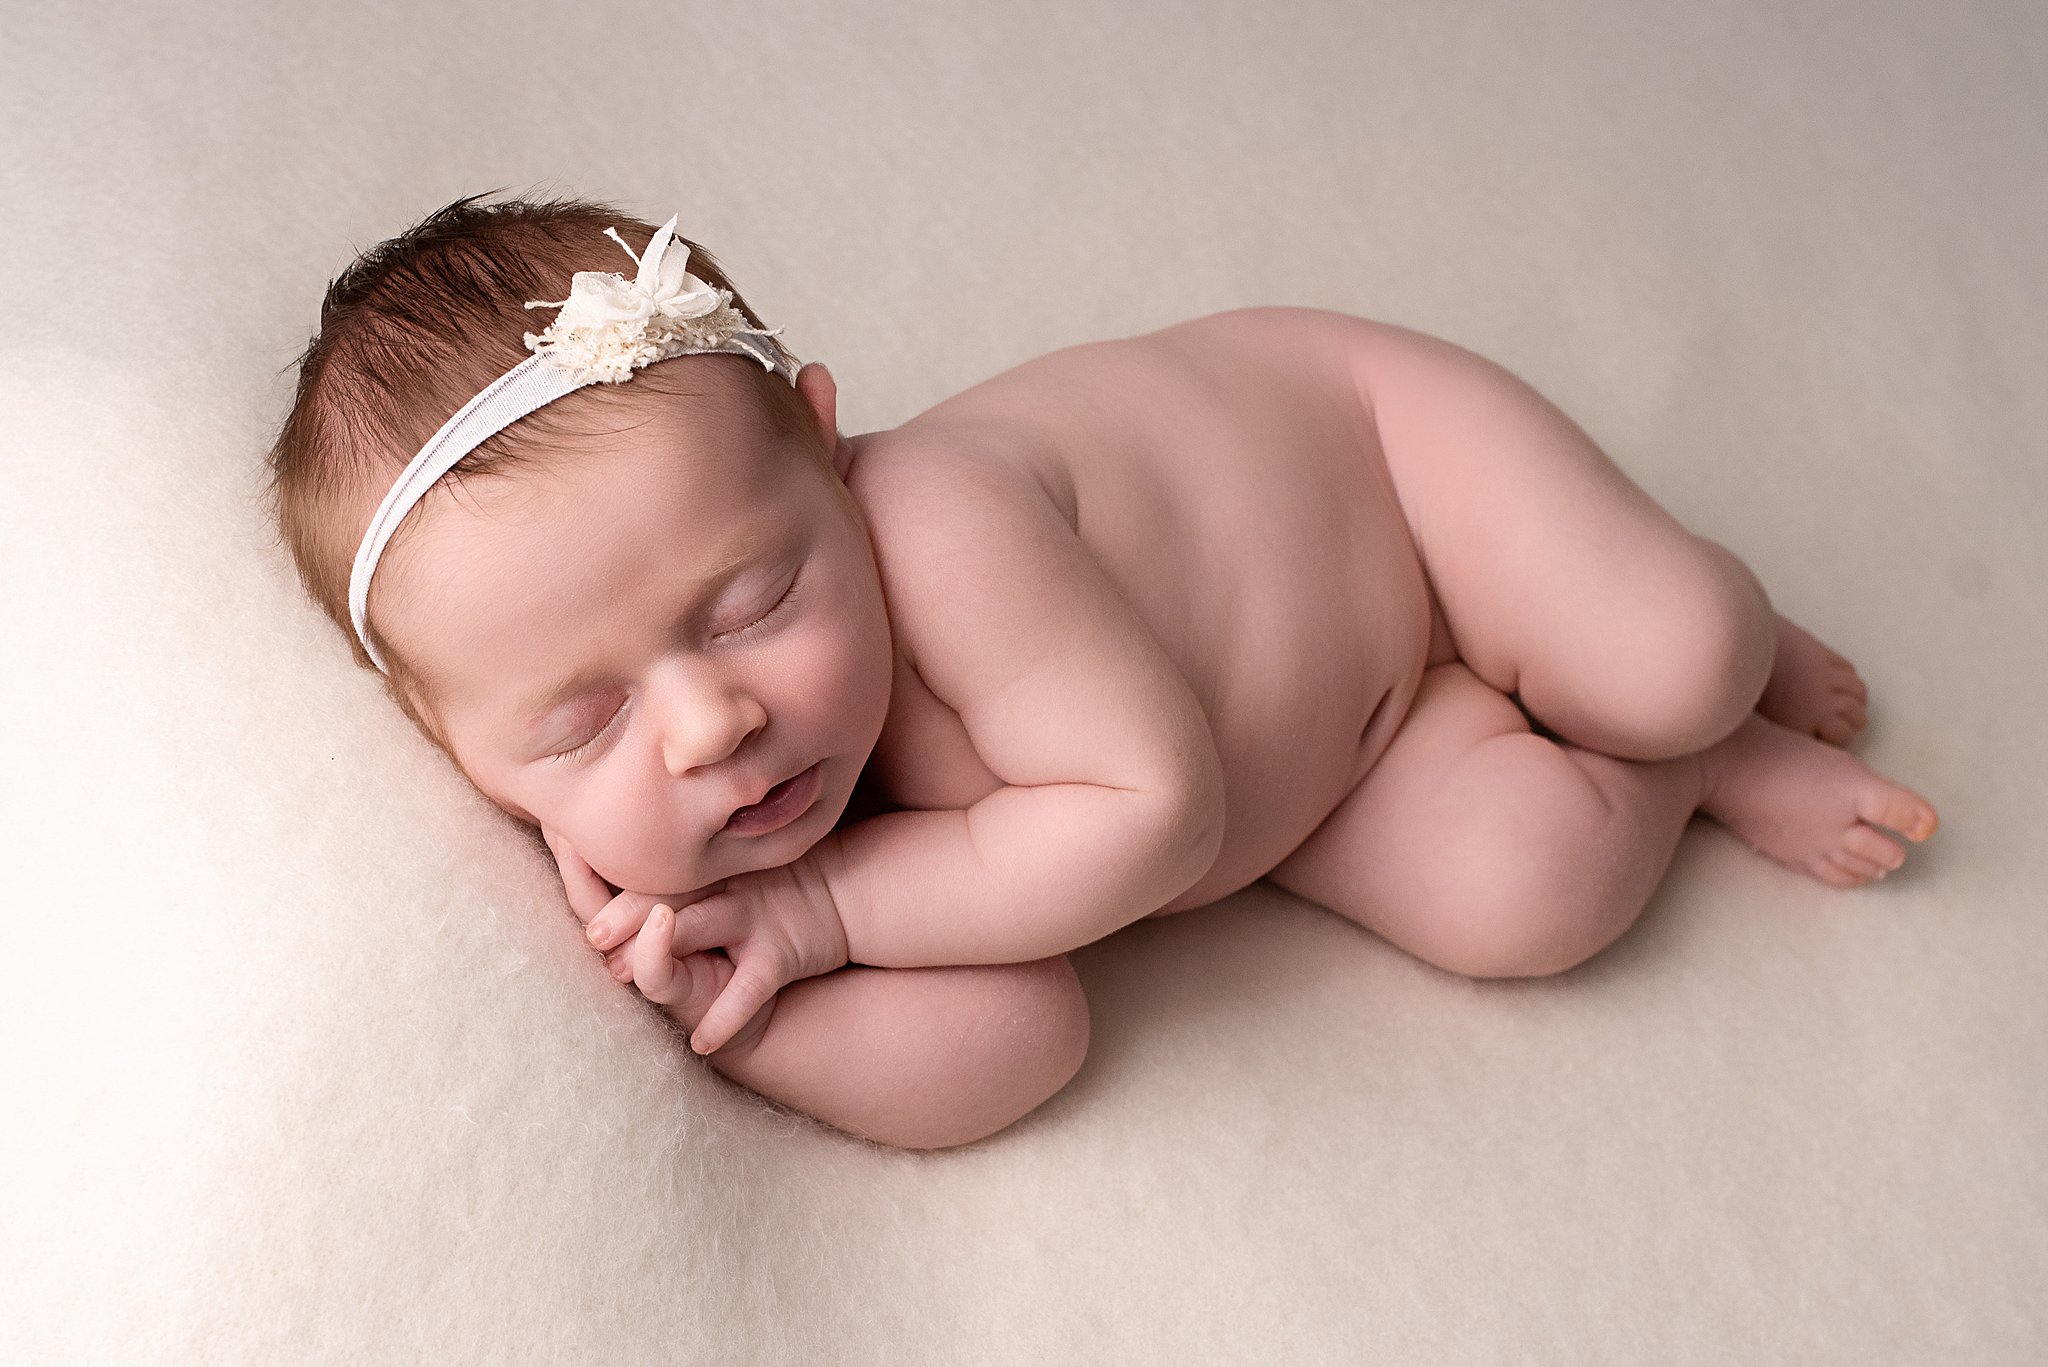 A newborn baby sleeps on its side while wearing a white headband baby furniture stores san diego